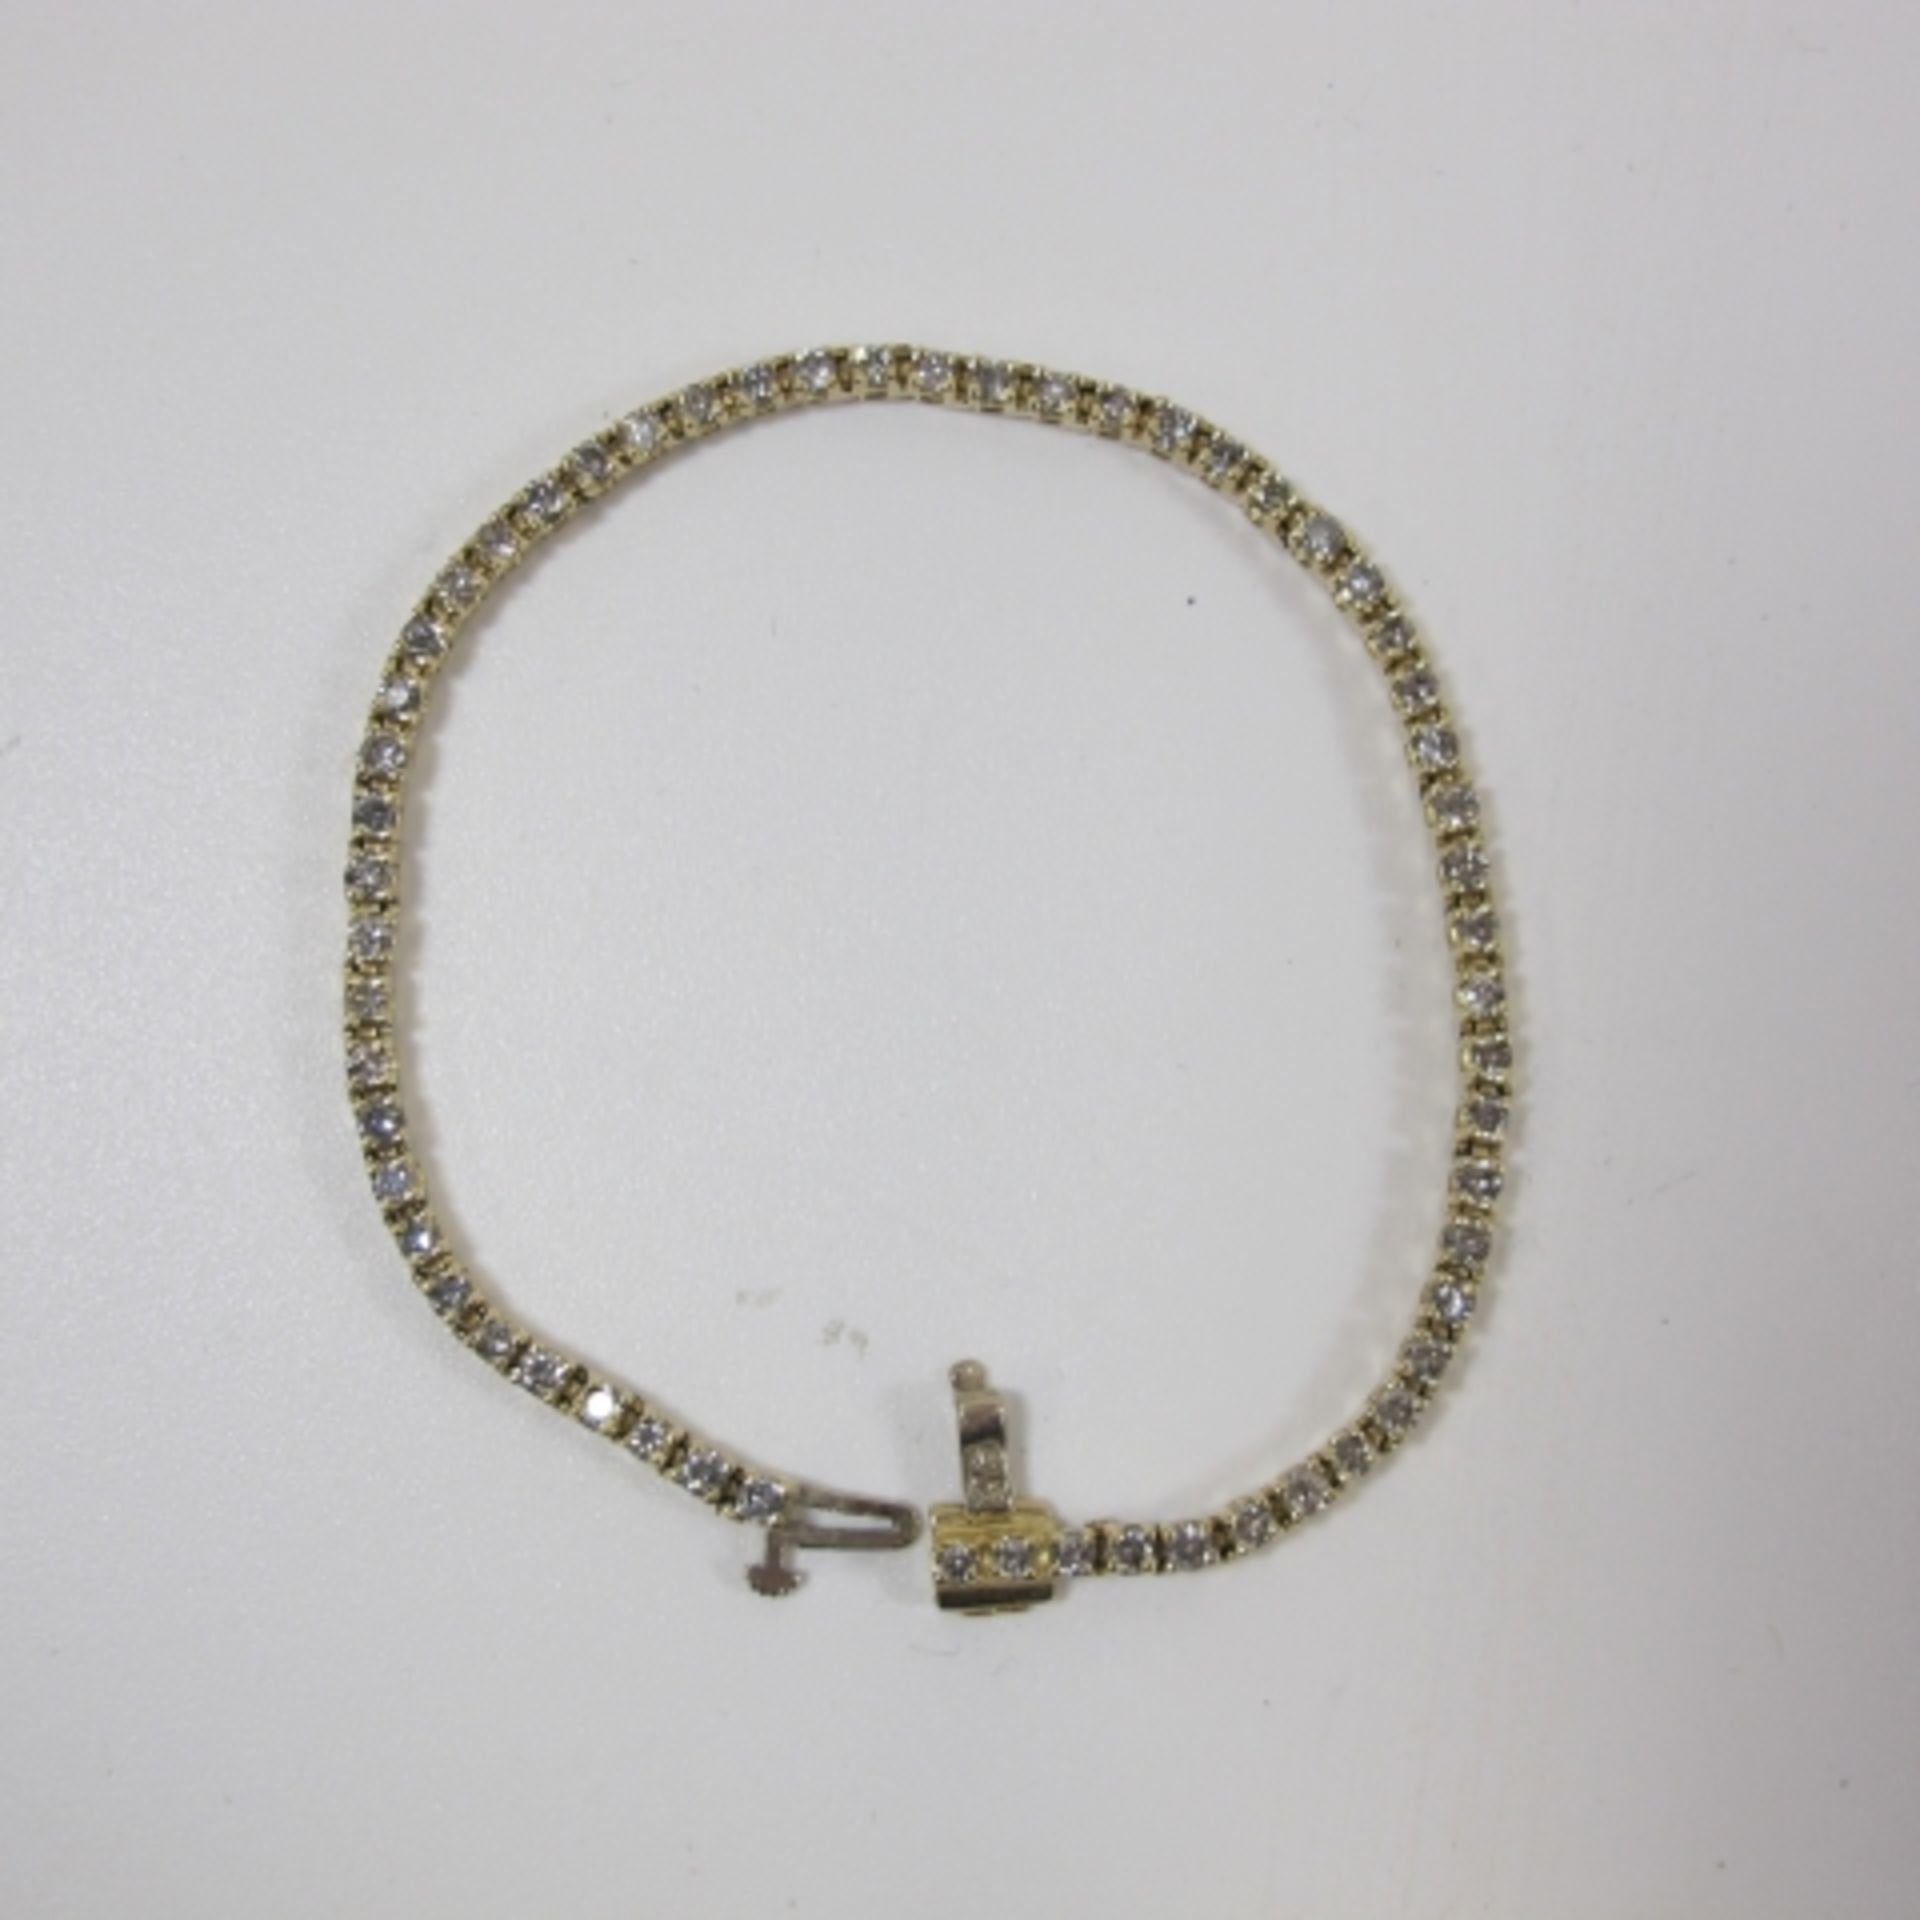 A 14K gold bracelet set with fifty eight diamonds (approximately three carats) (est. £350-£500) - Image 2 of 3